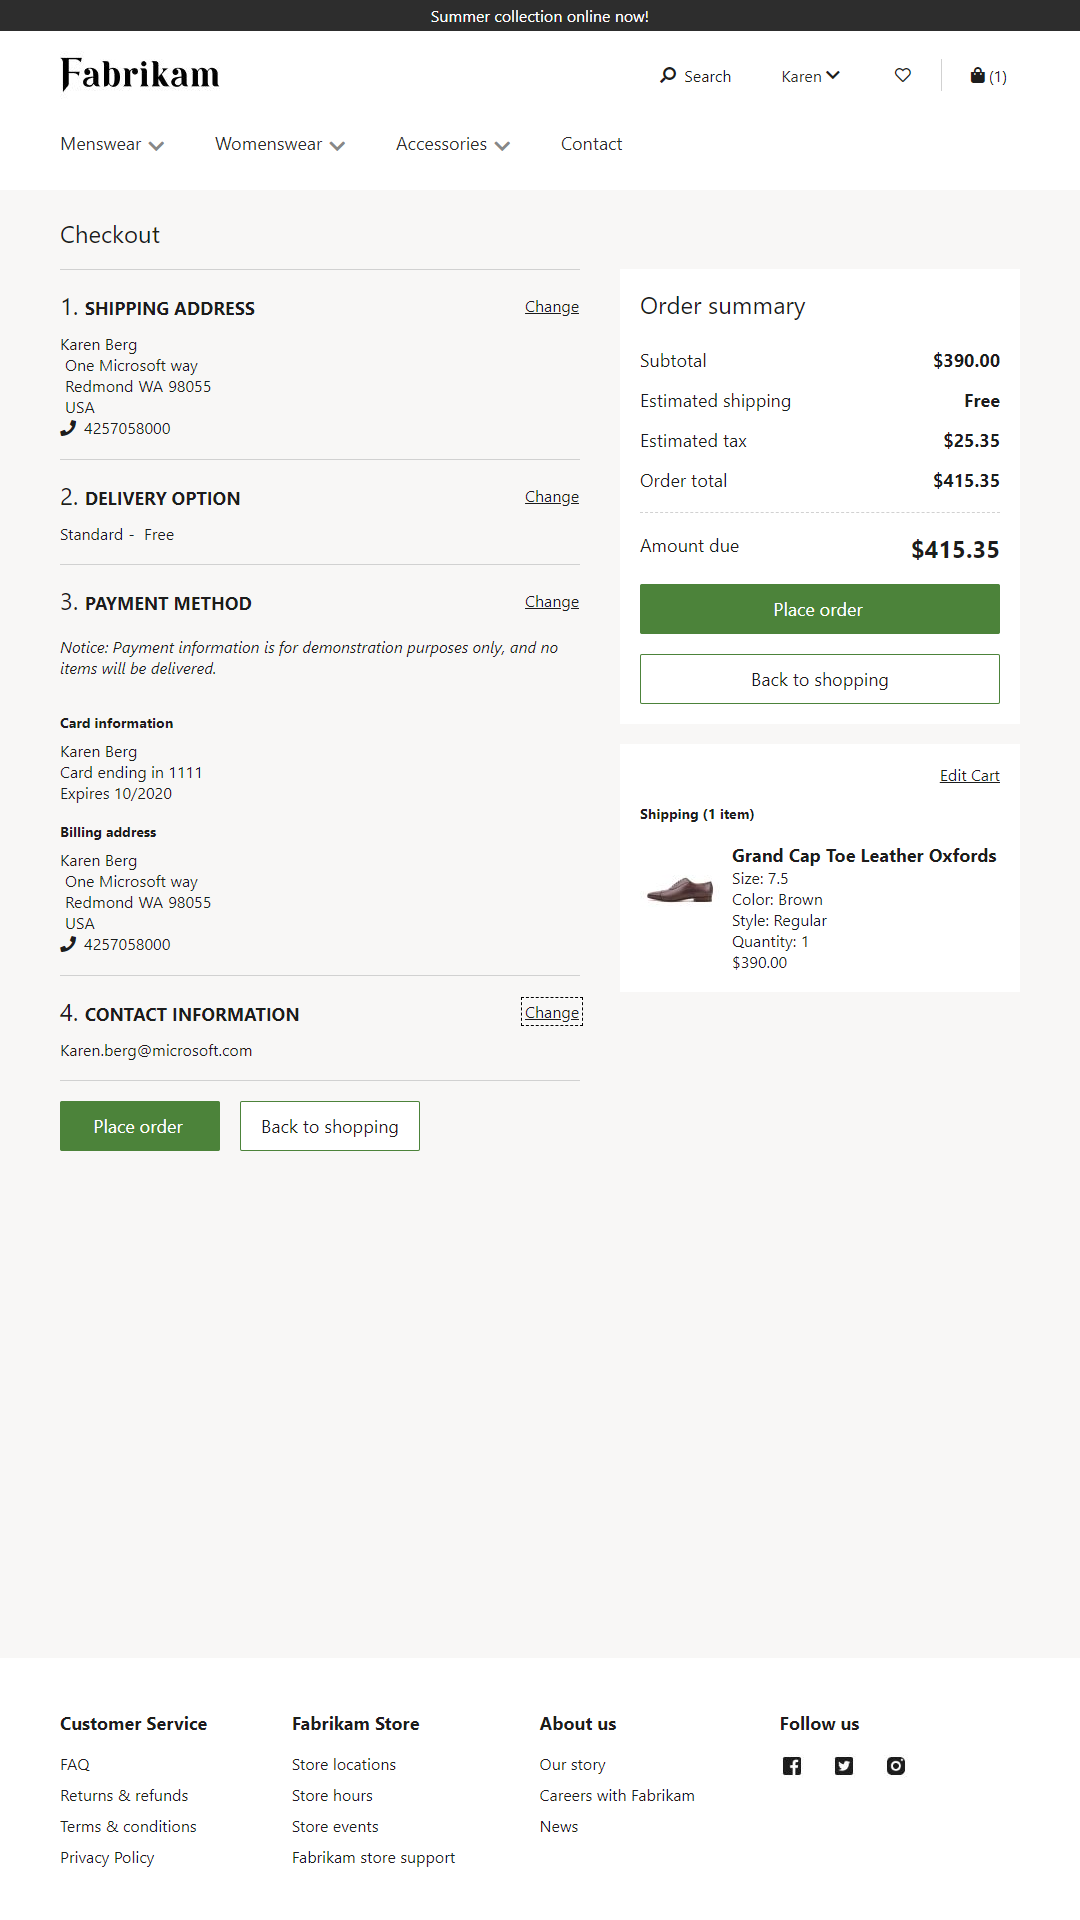 Example of a checkout module.